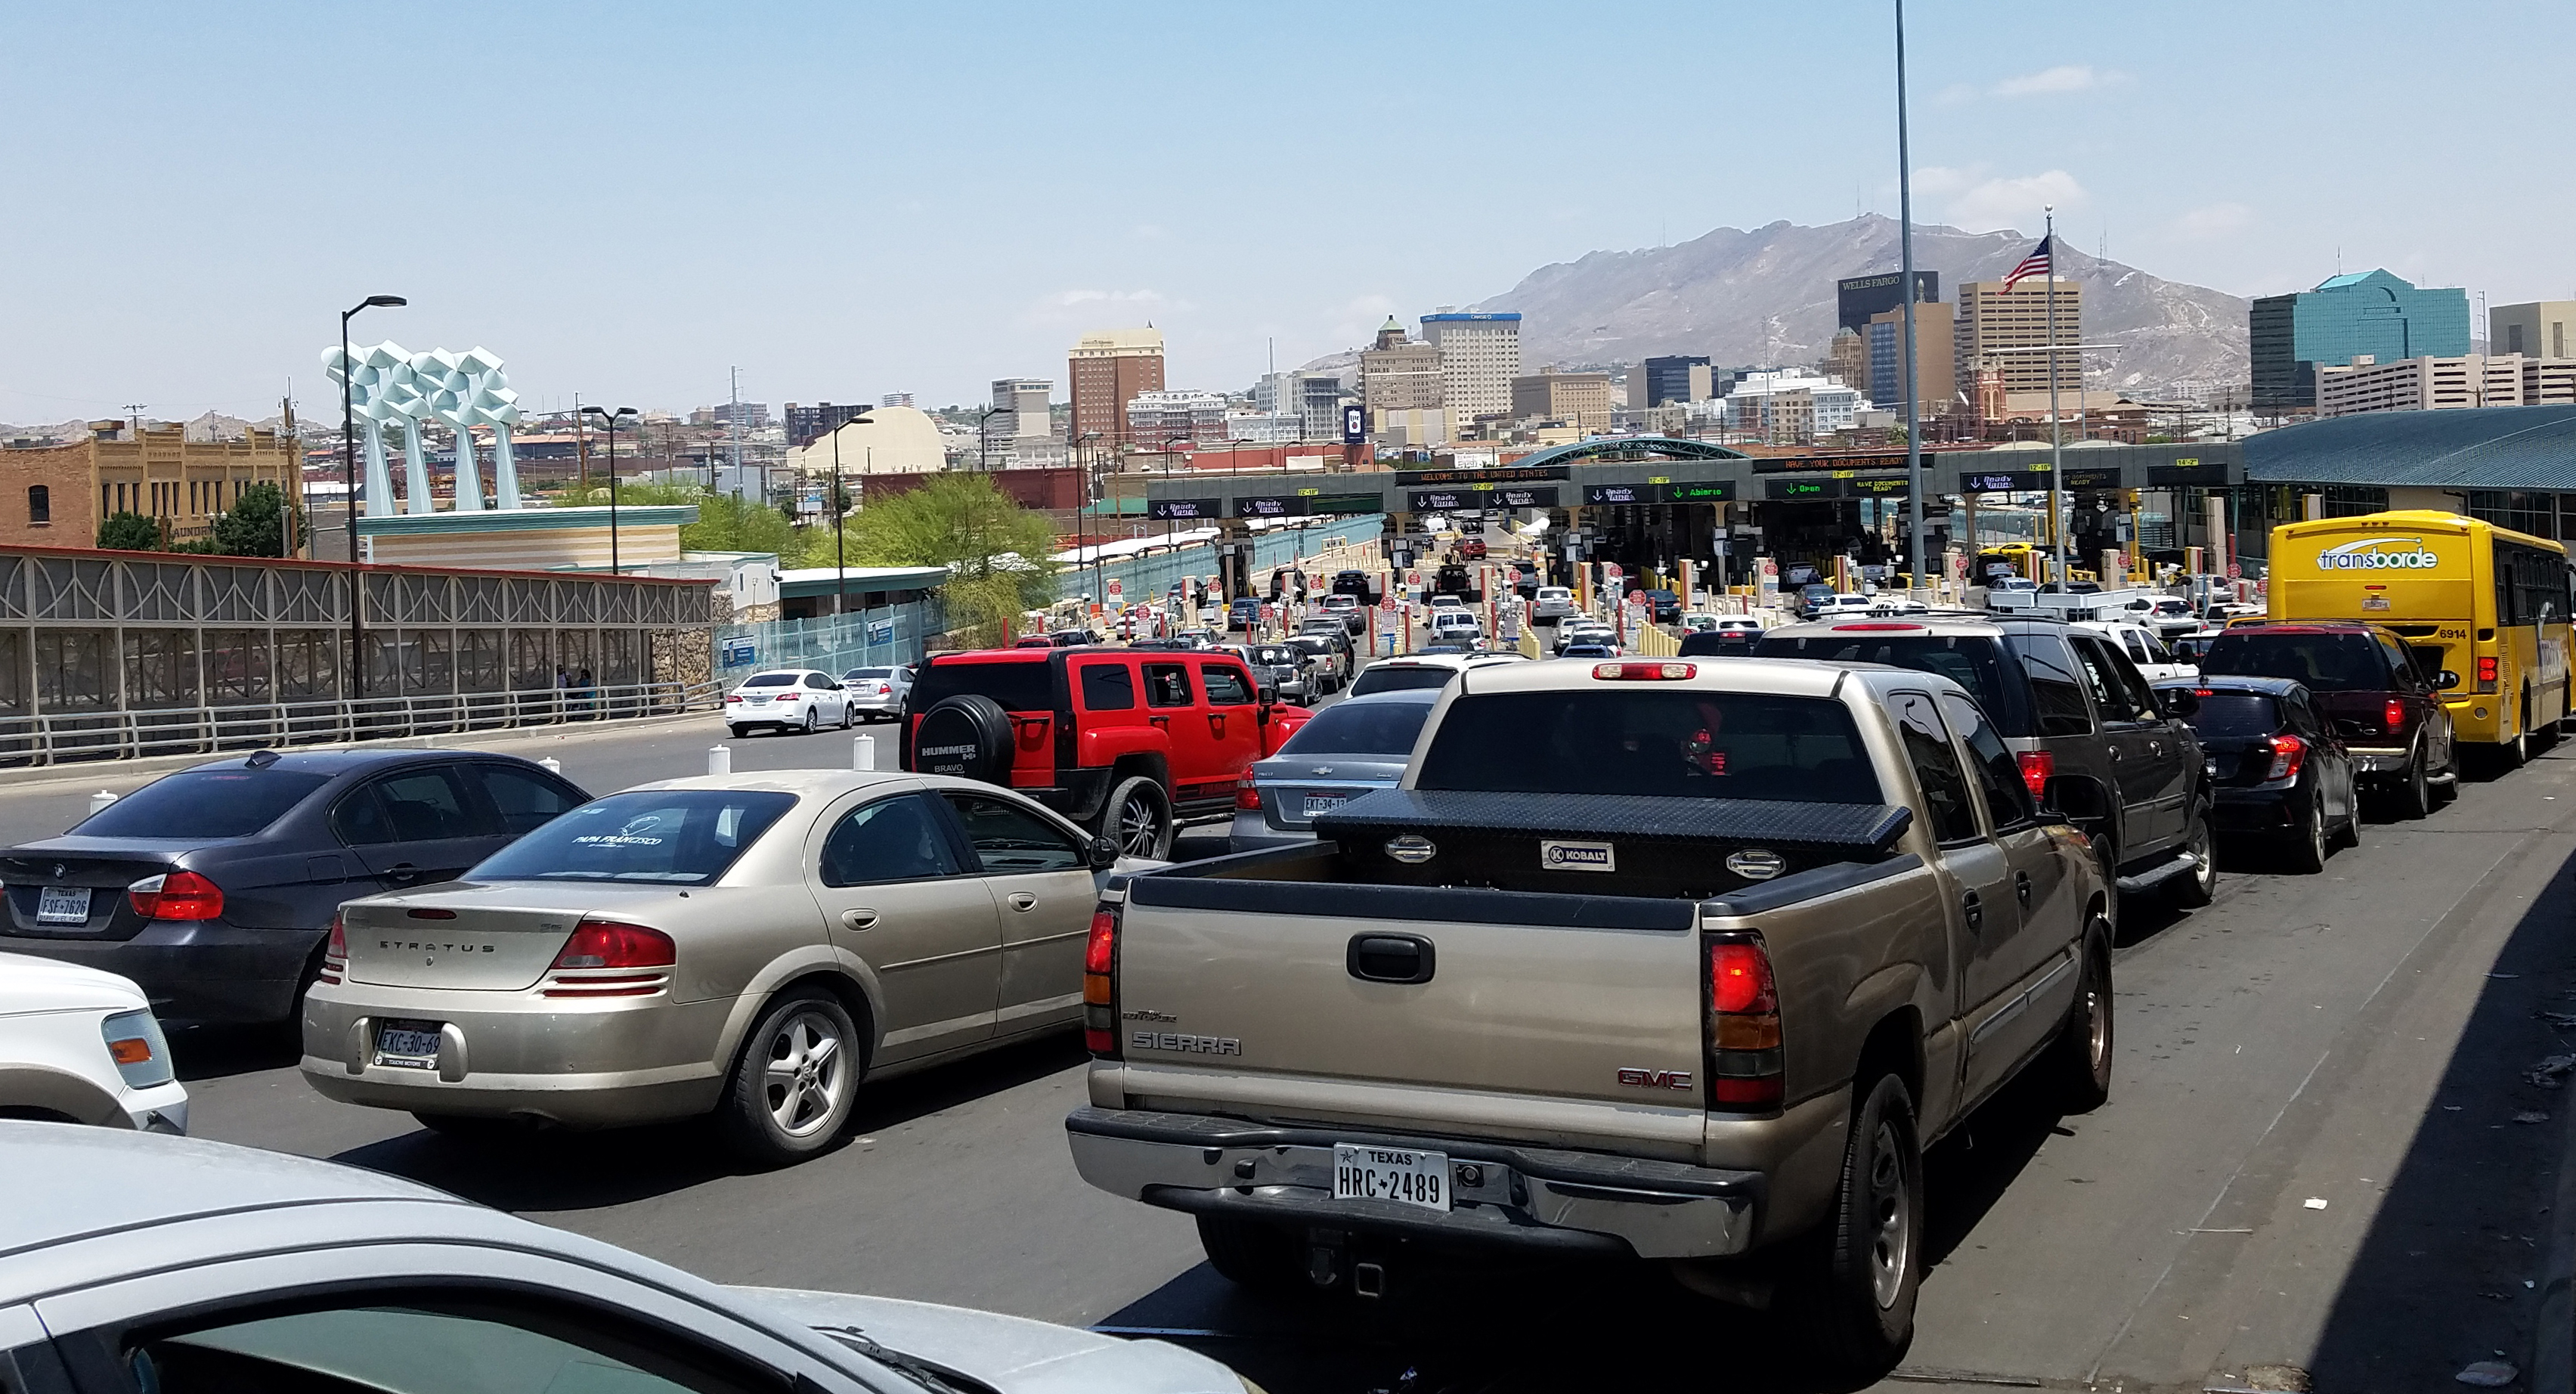 Borders are meant to filter entry from one jurisdiction to another. Here, traffic builds for entry from Ciudad Juarez to El Paso across the Santa Fe Bridge.